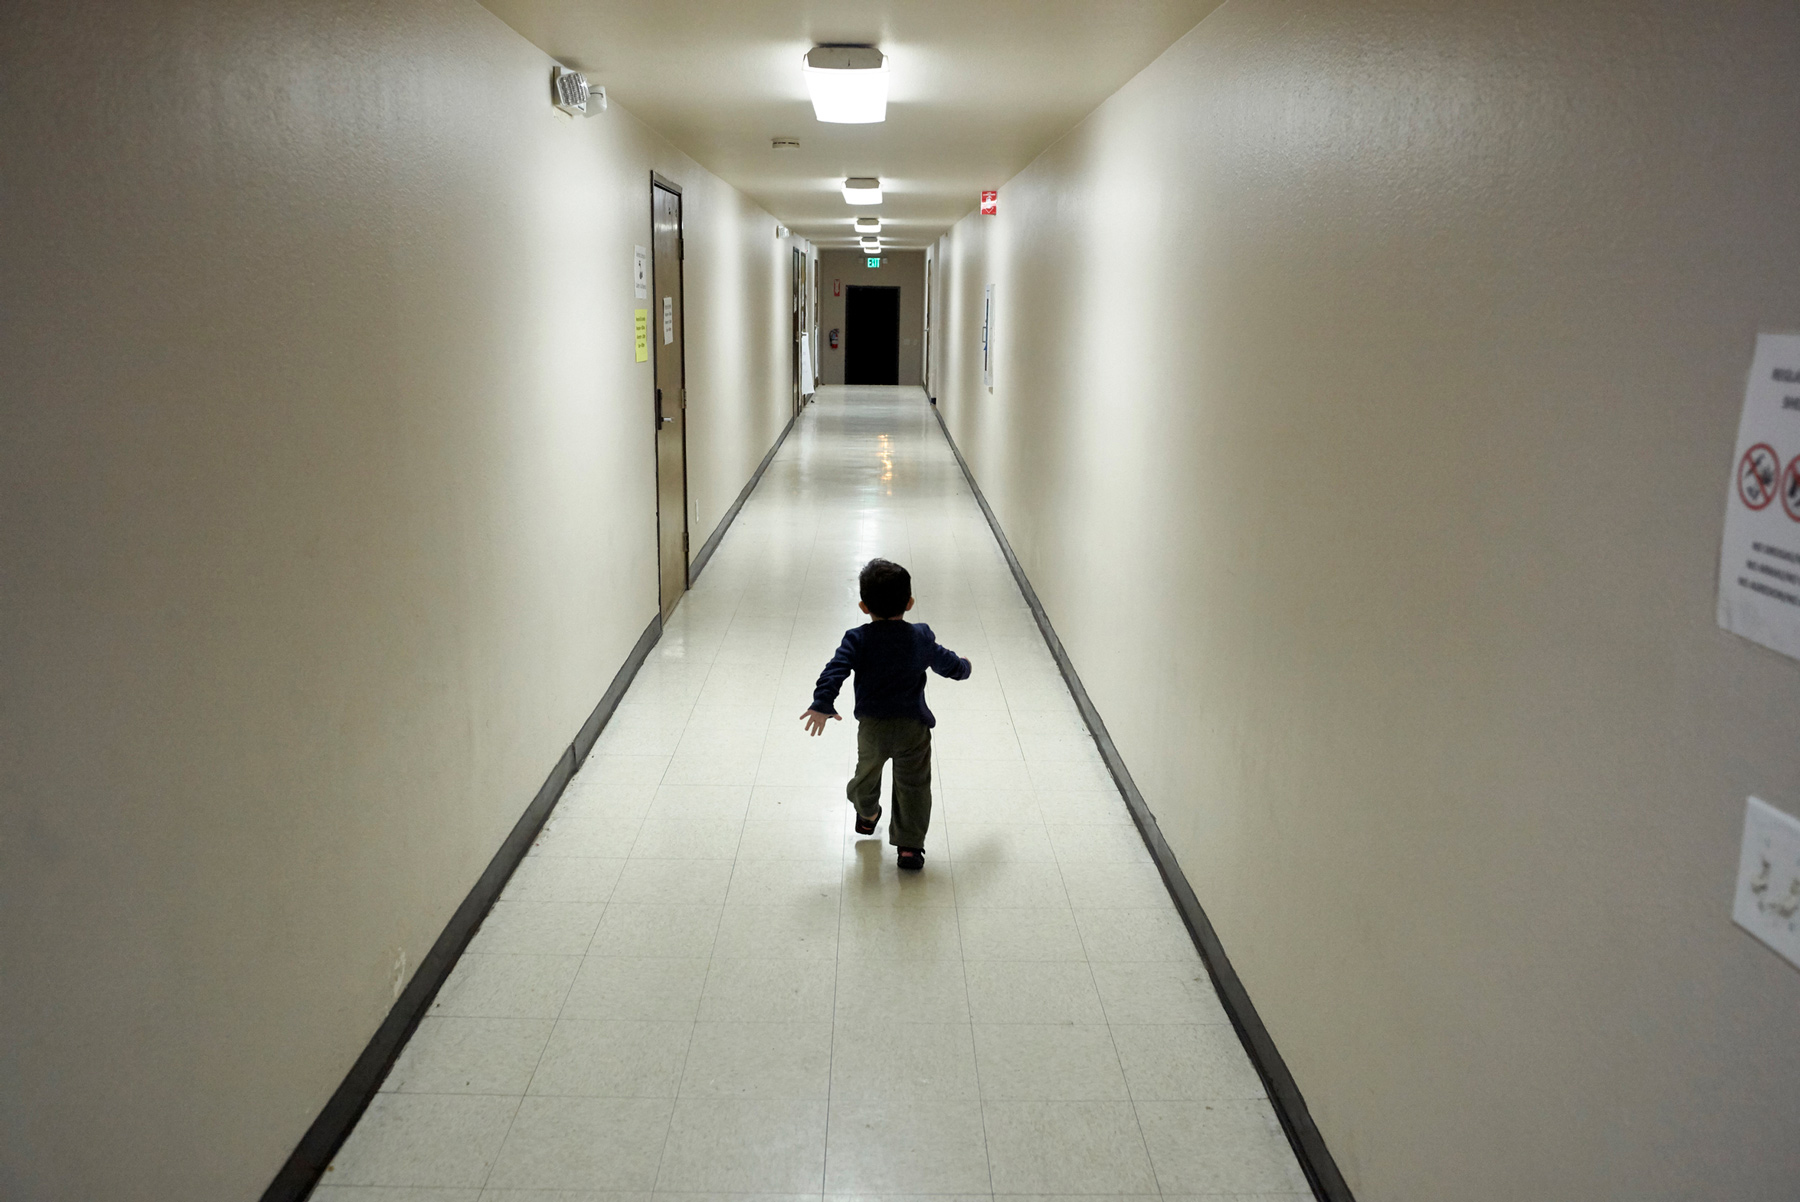 Are Houston’s immigration courts becoming more child-friendly? Advocates say not enough.